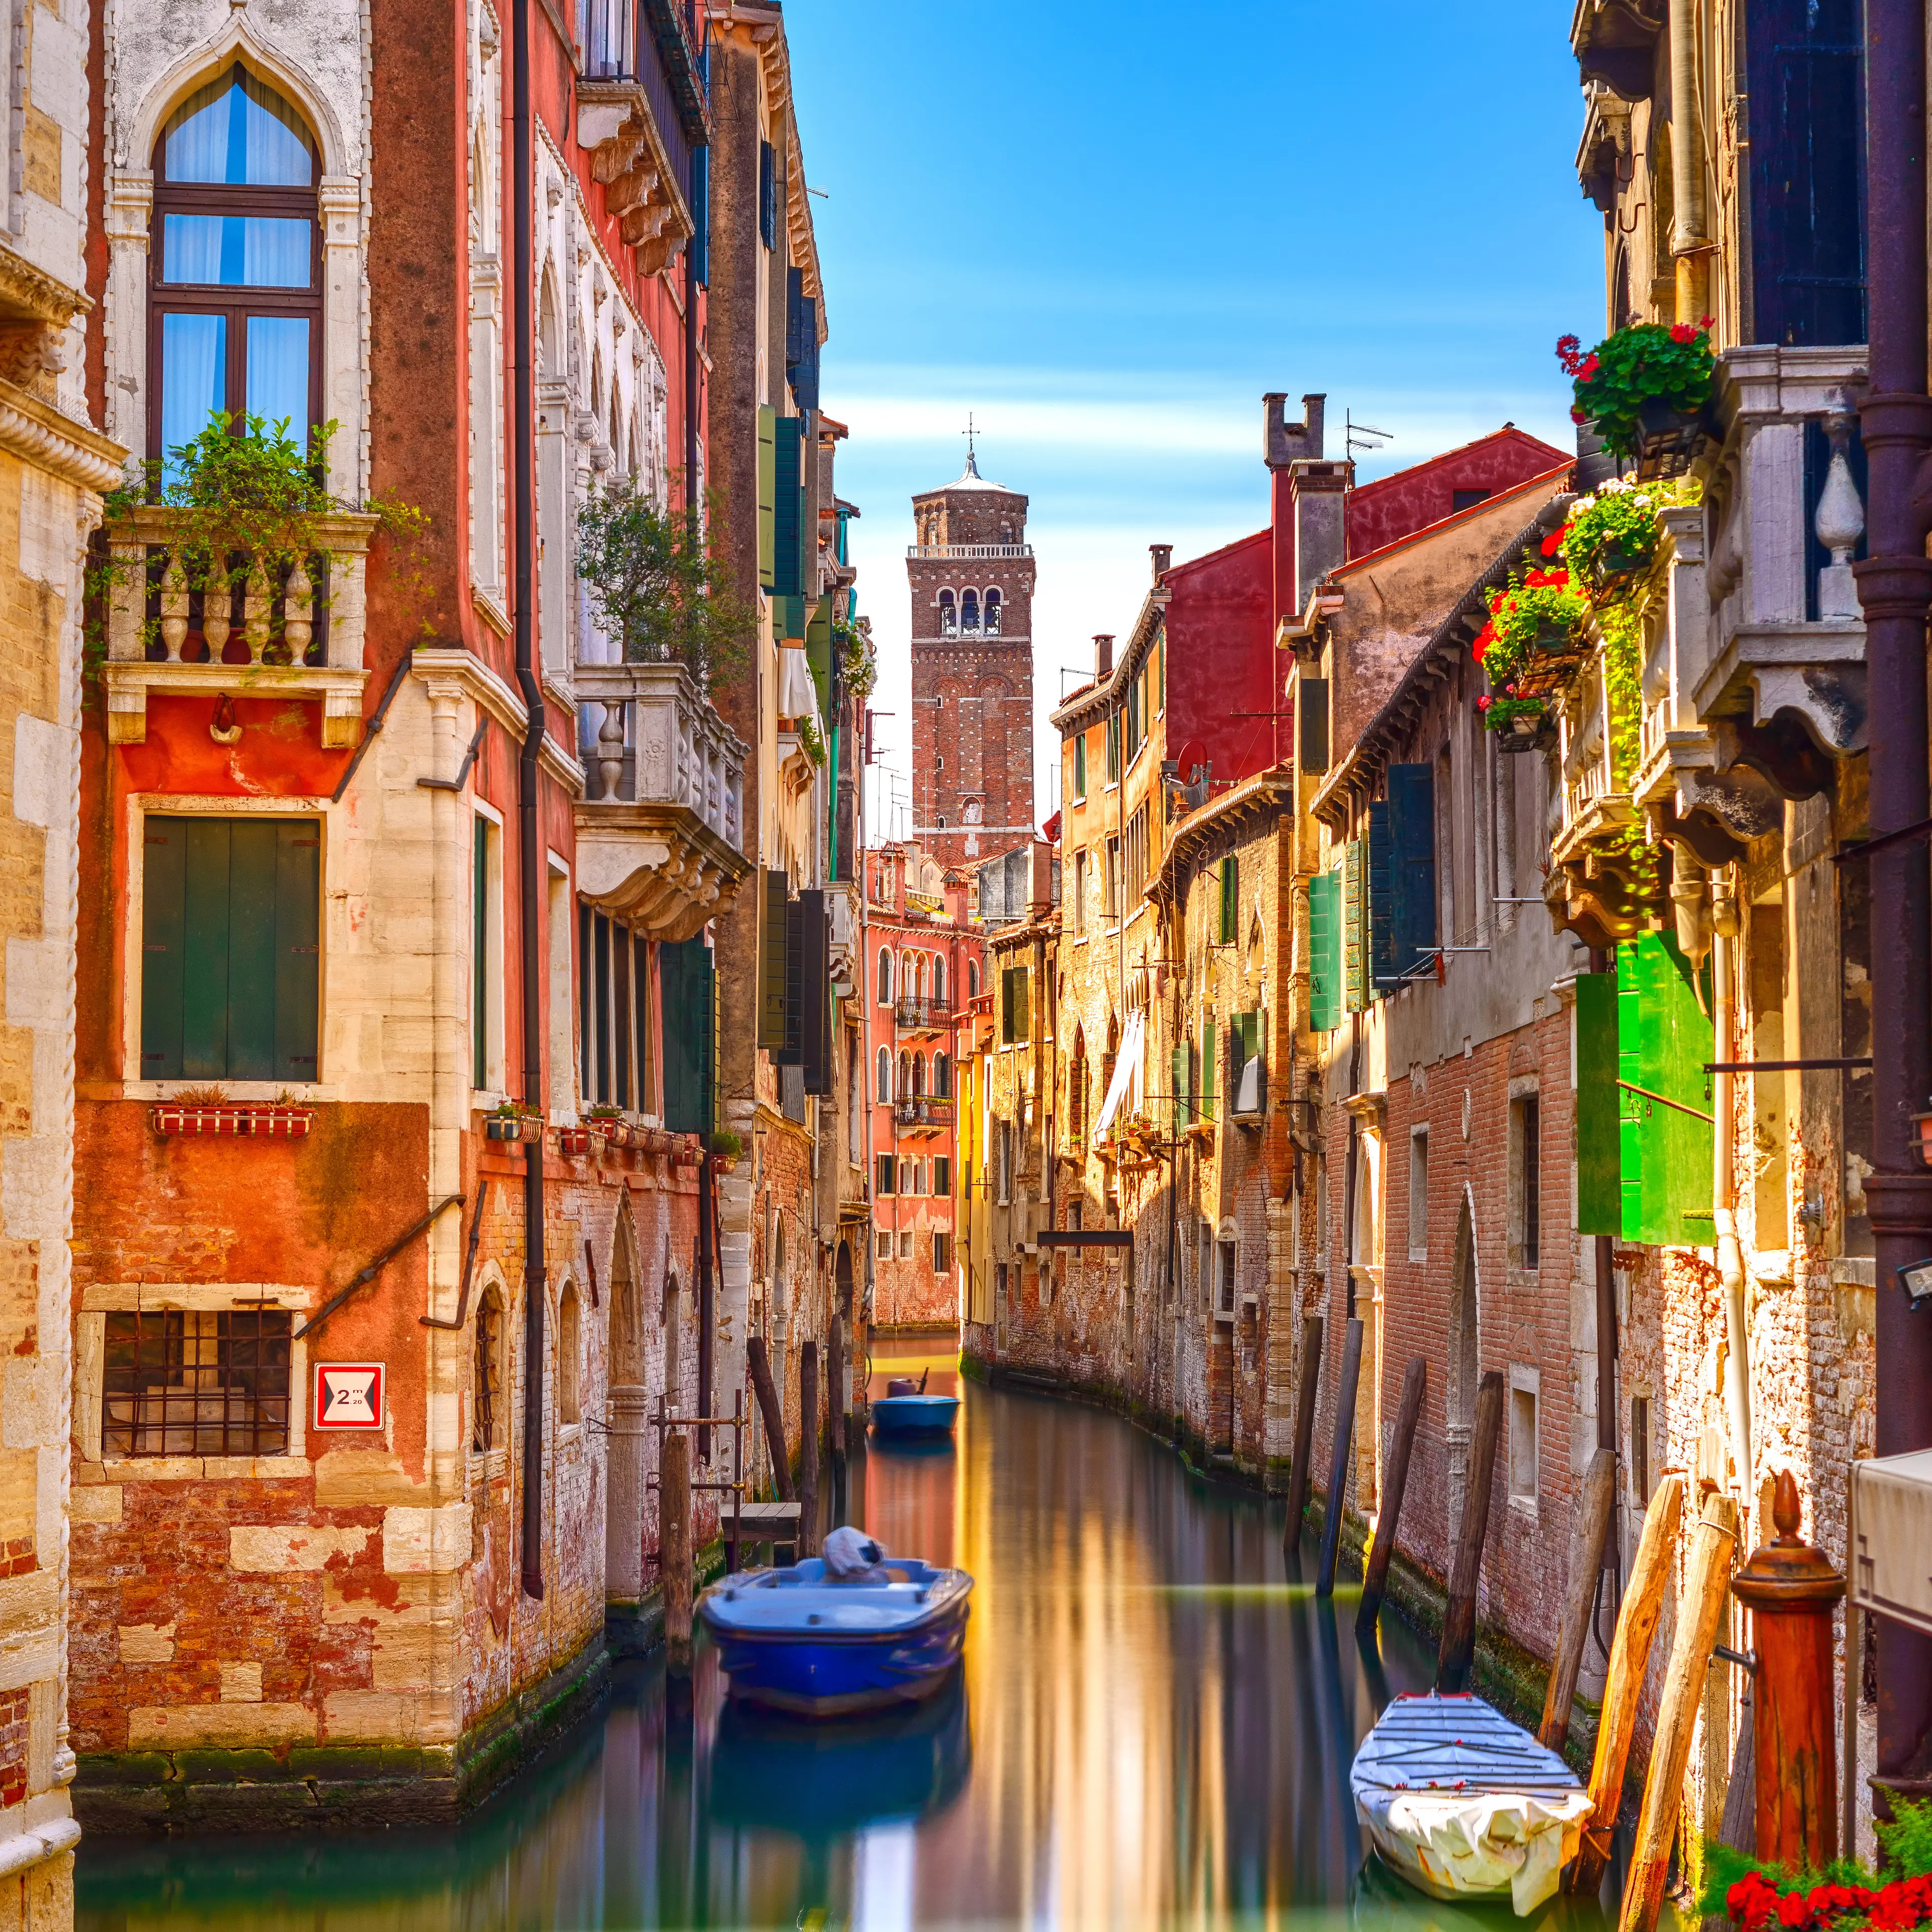 3-Day Unforgettable Getaway Guide to Venice, Italy